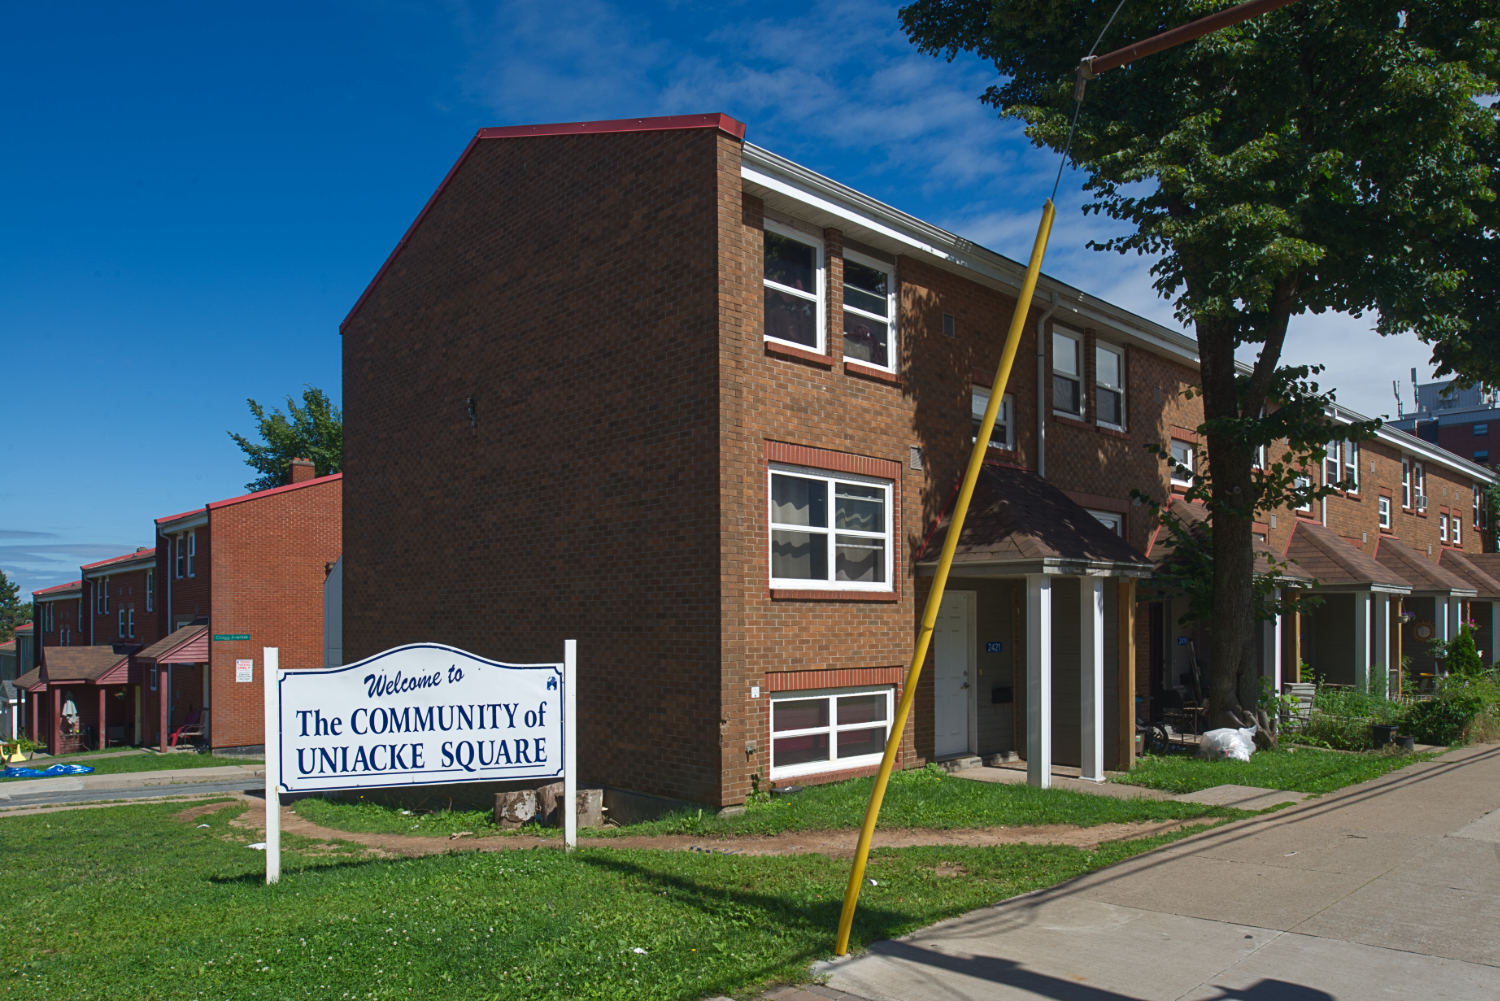 Brick row houses, with a sign welcoming people to the 'Community of Uniacke Square'.